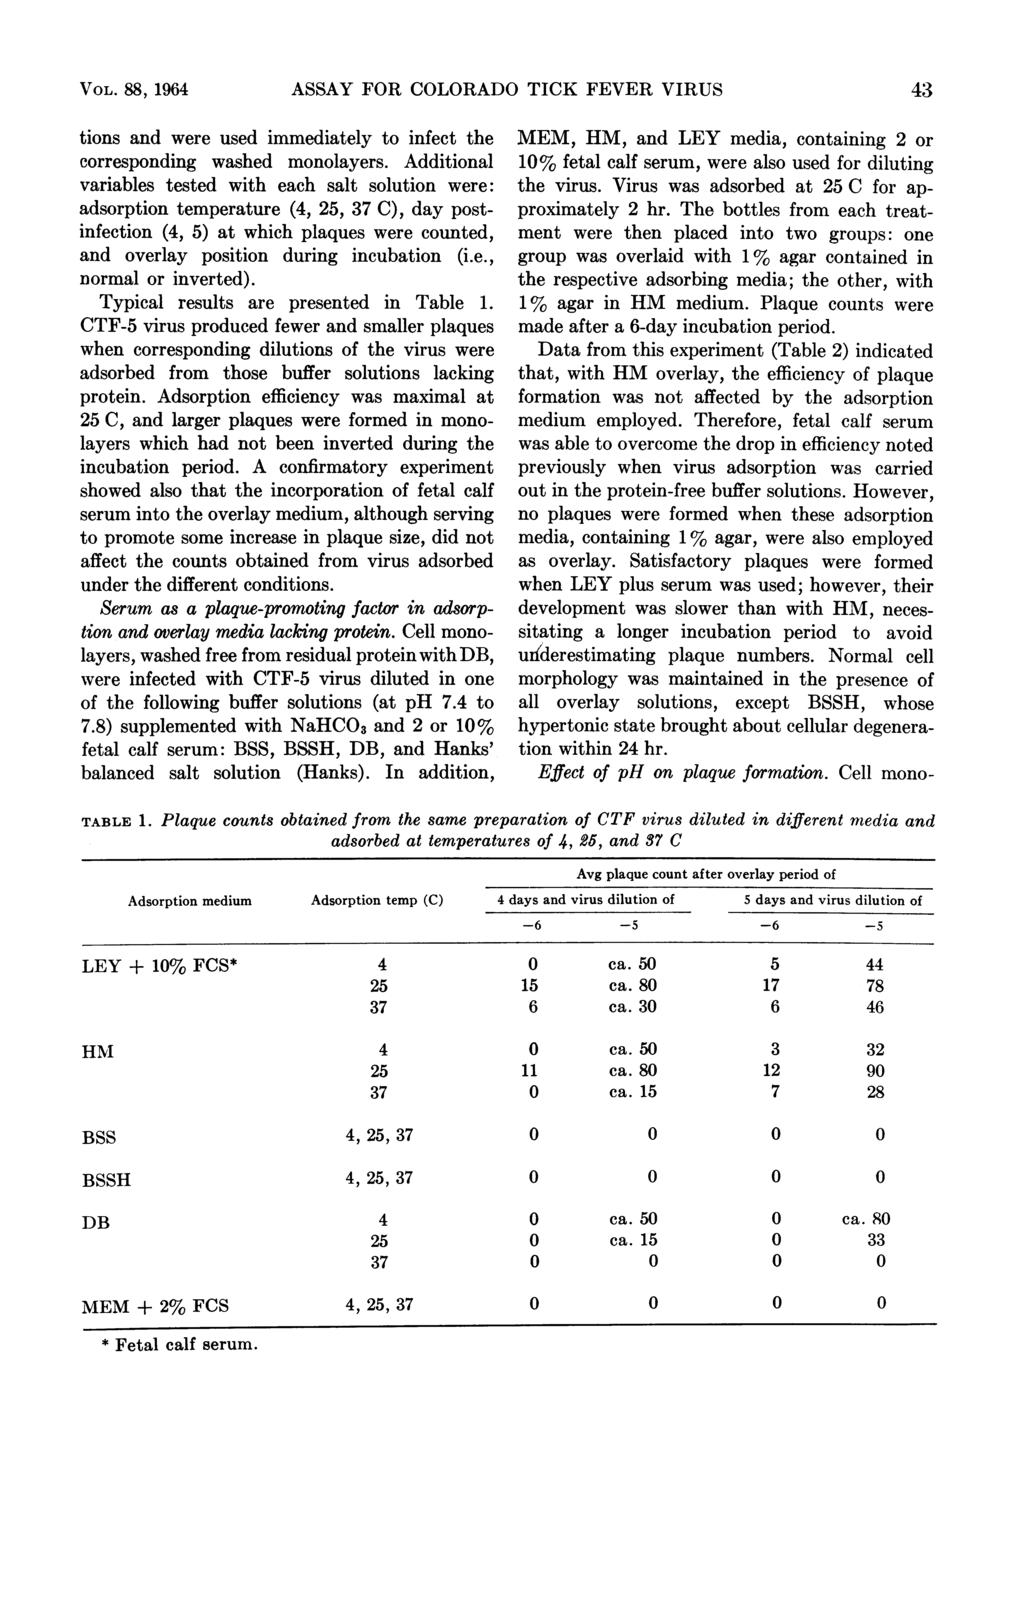 VOL. 88, 1964 ASSAY FOR OLORADO TIK FEVER VIRUS 43 tions and were used immediately to infect the corresponding washed monolayers.